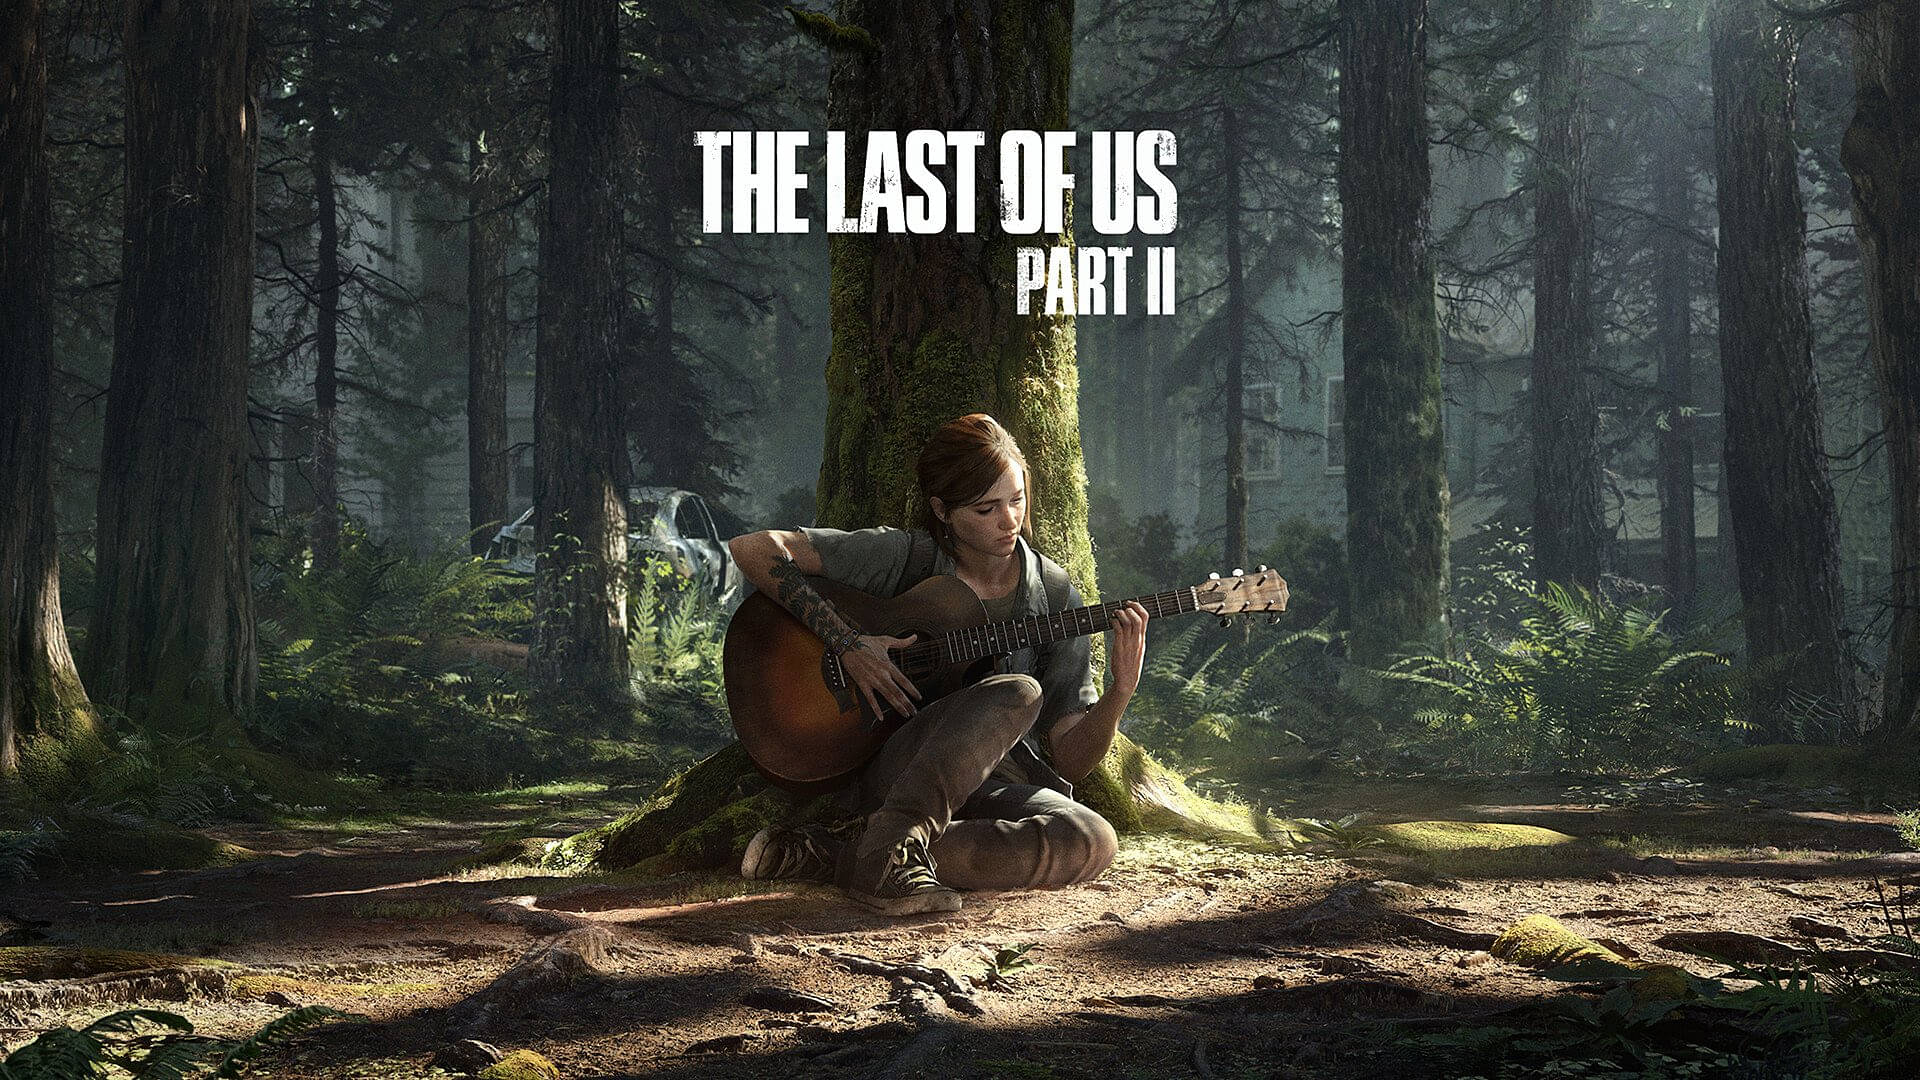 The Last of Us PC Port Releases Patch 1.0.2.0 to Fix Even More Bugs